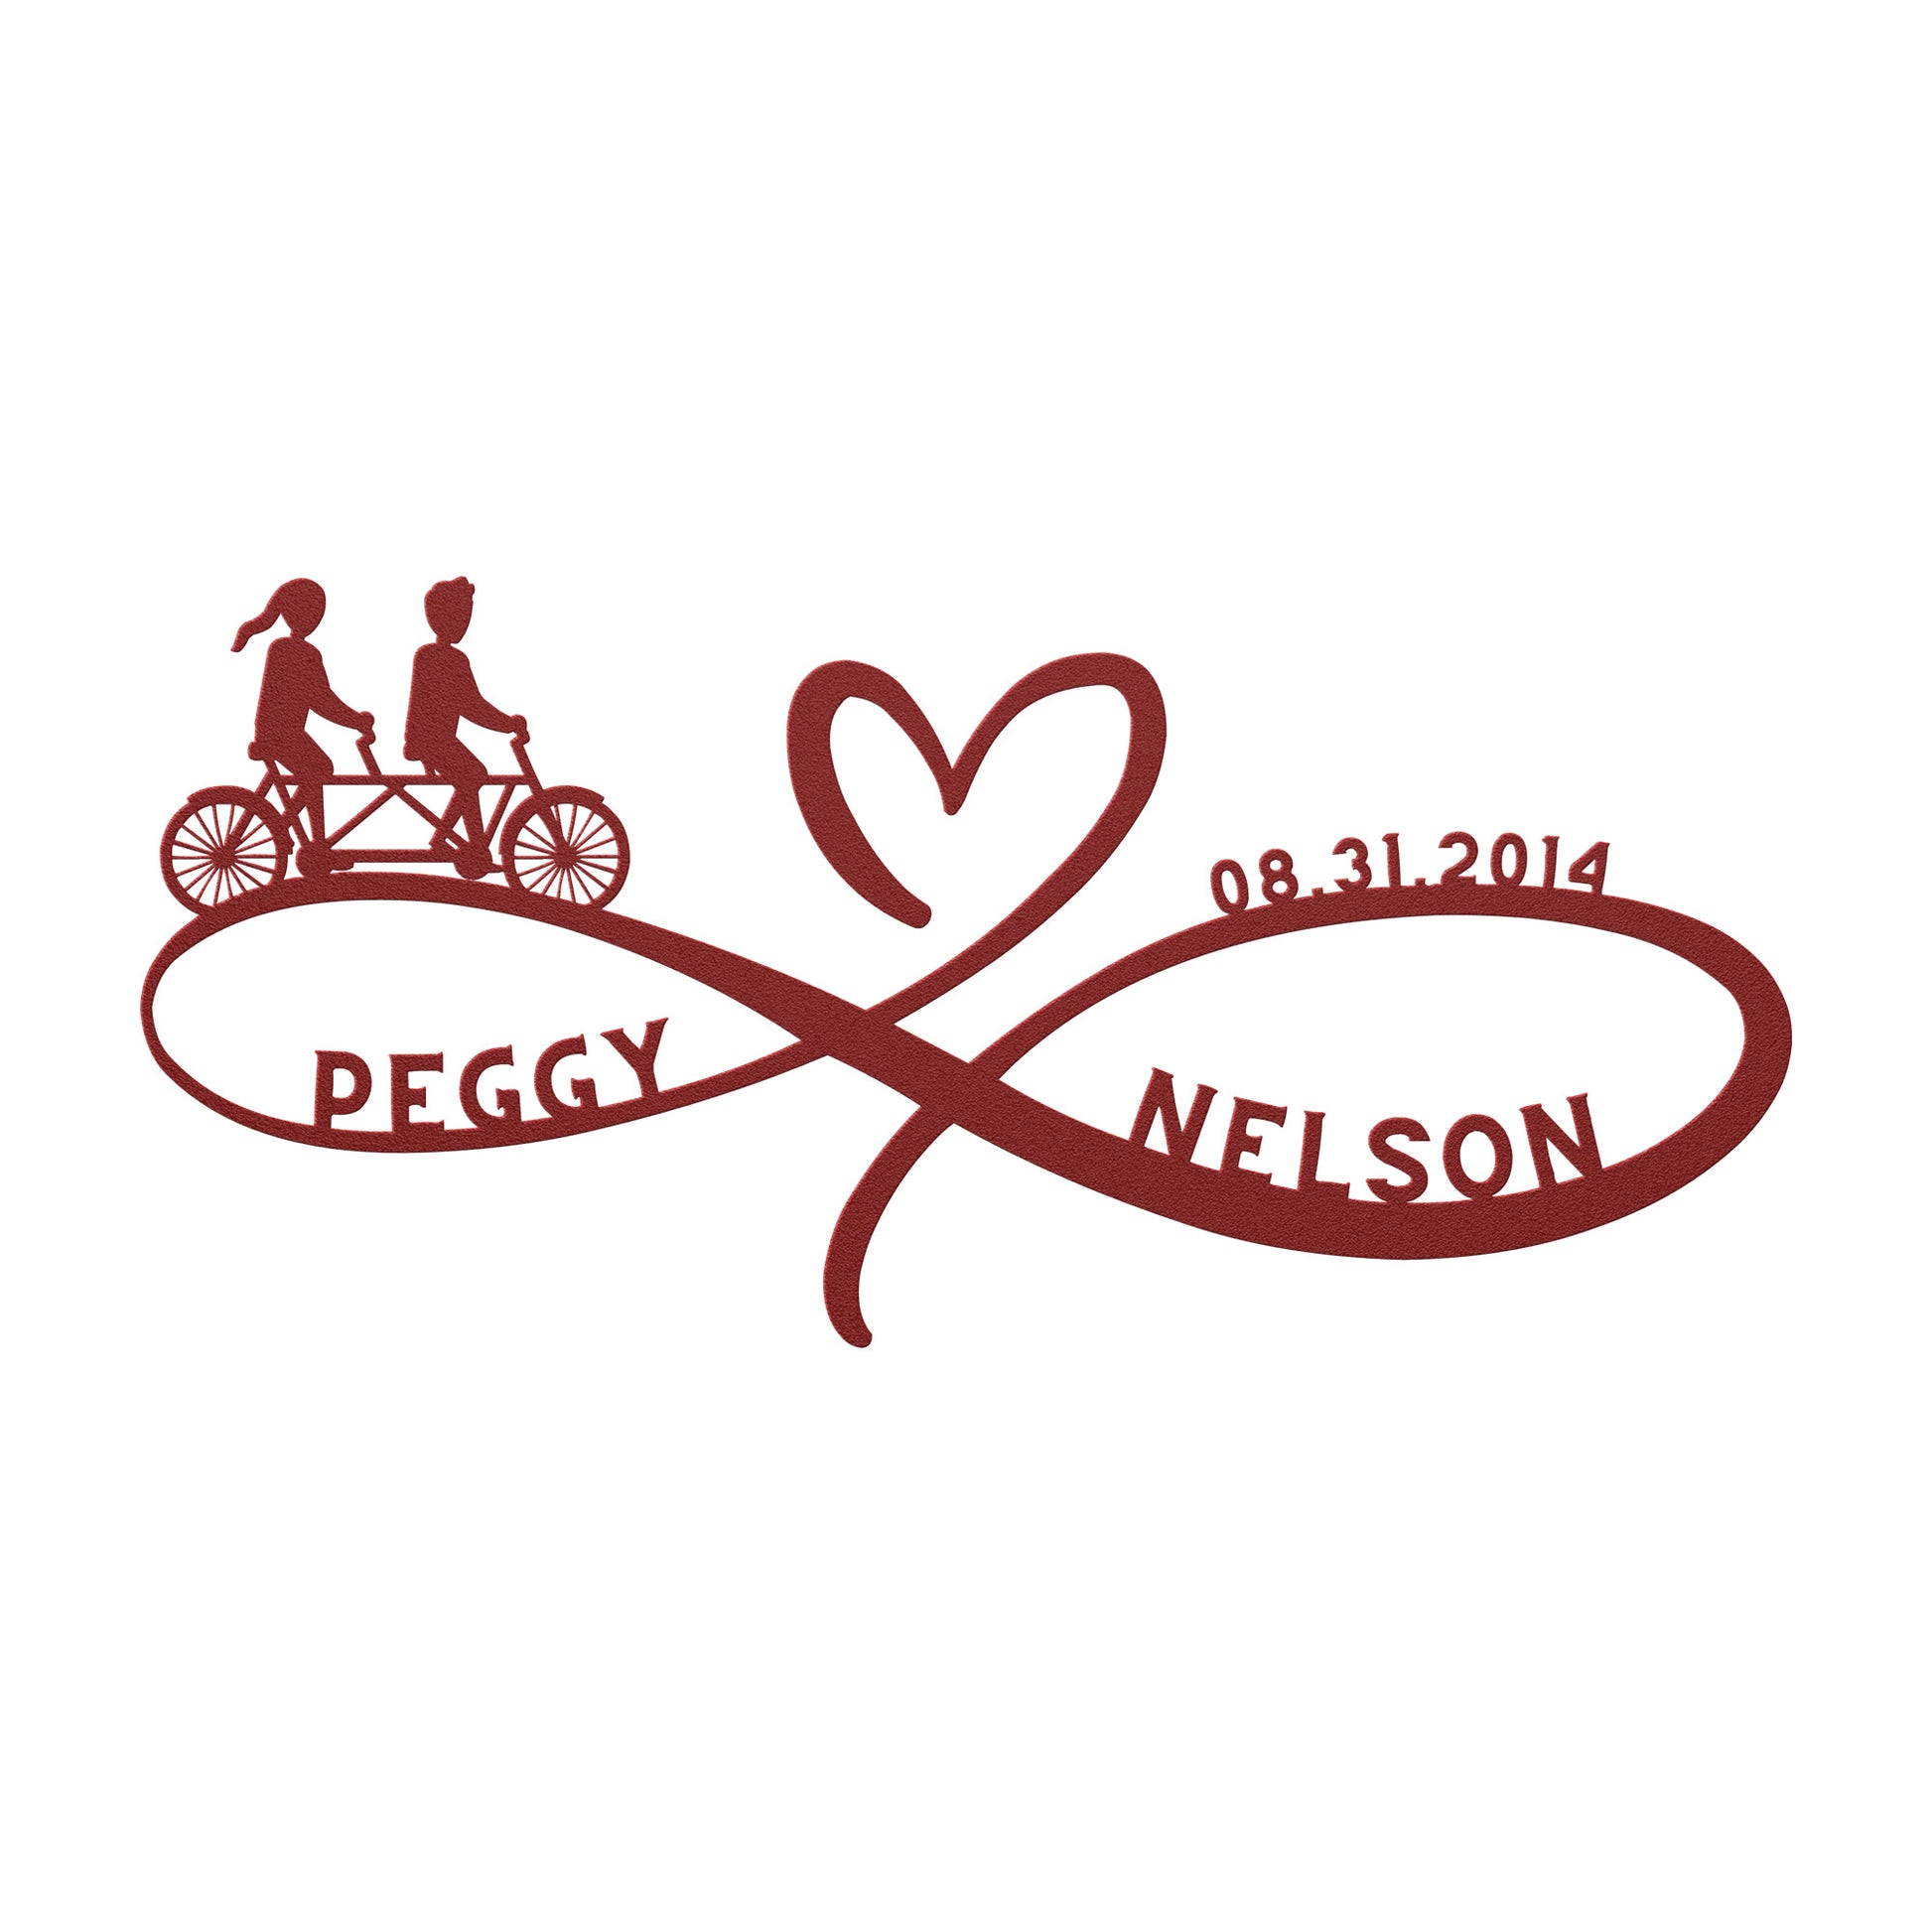 Peggy and Nelson wedding logo designed on a teelaunch Personalized Infinity Love Heart Metal Sign For Cycling Couples, enhanced with a flawless powder coated finish.